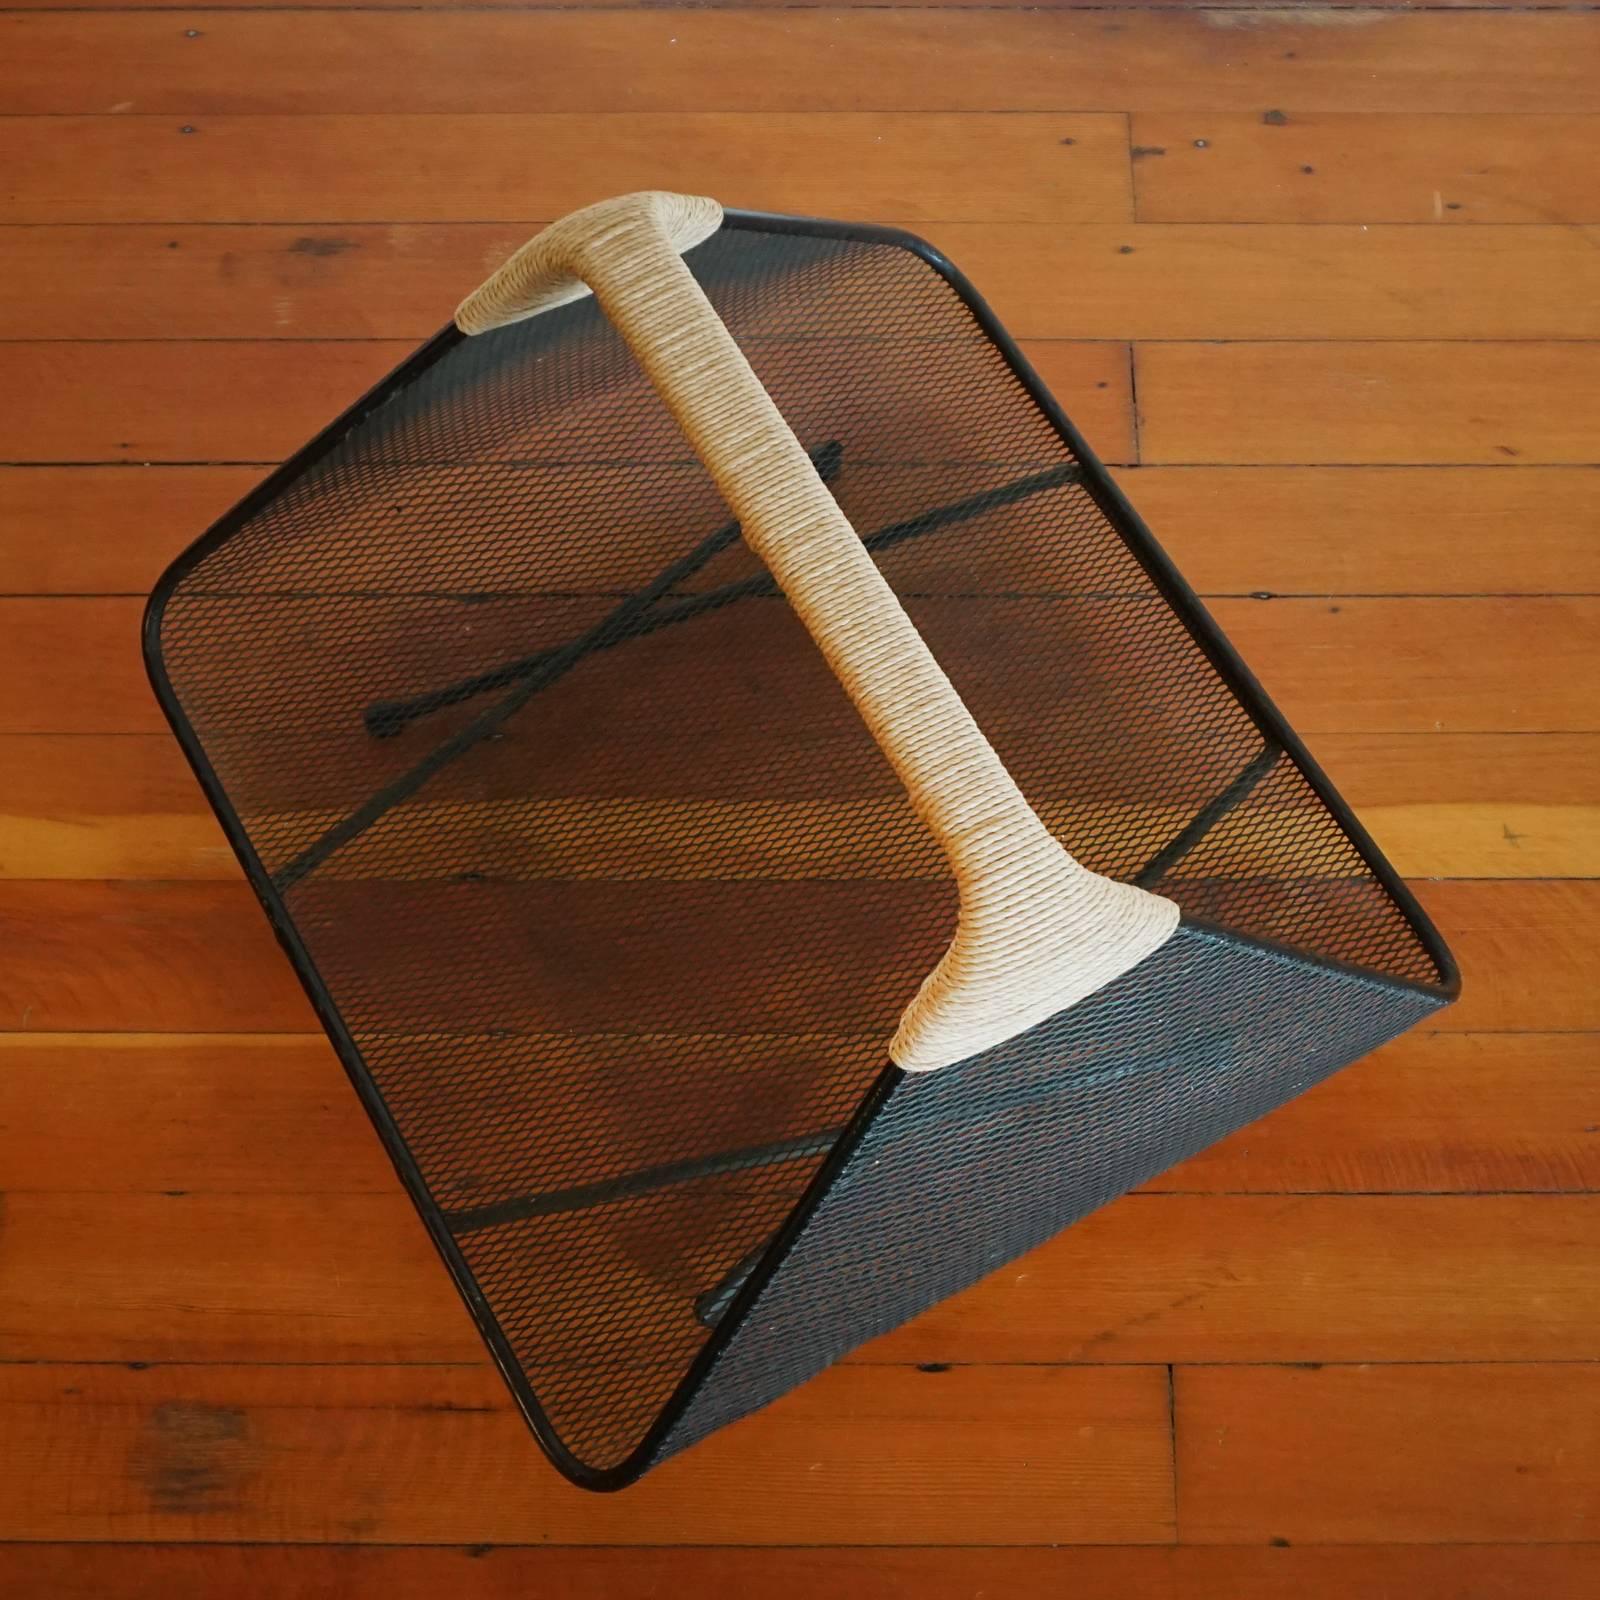 Magazine or log holder by Tony Paul for Woodlin-Hall. Iron frame, mesh body and rush-wrapped handle, 1950s.